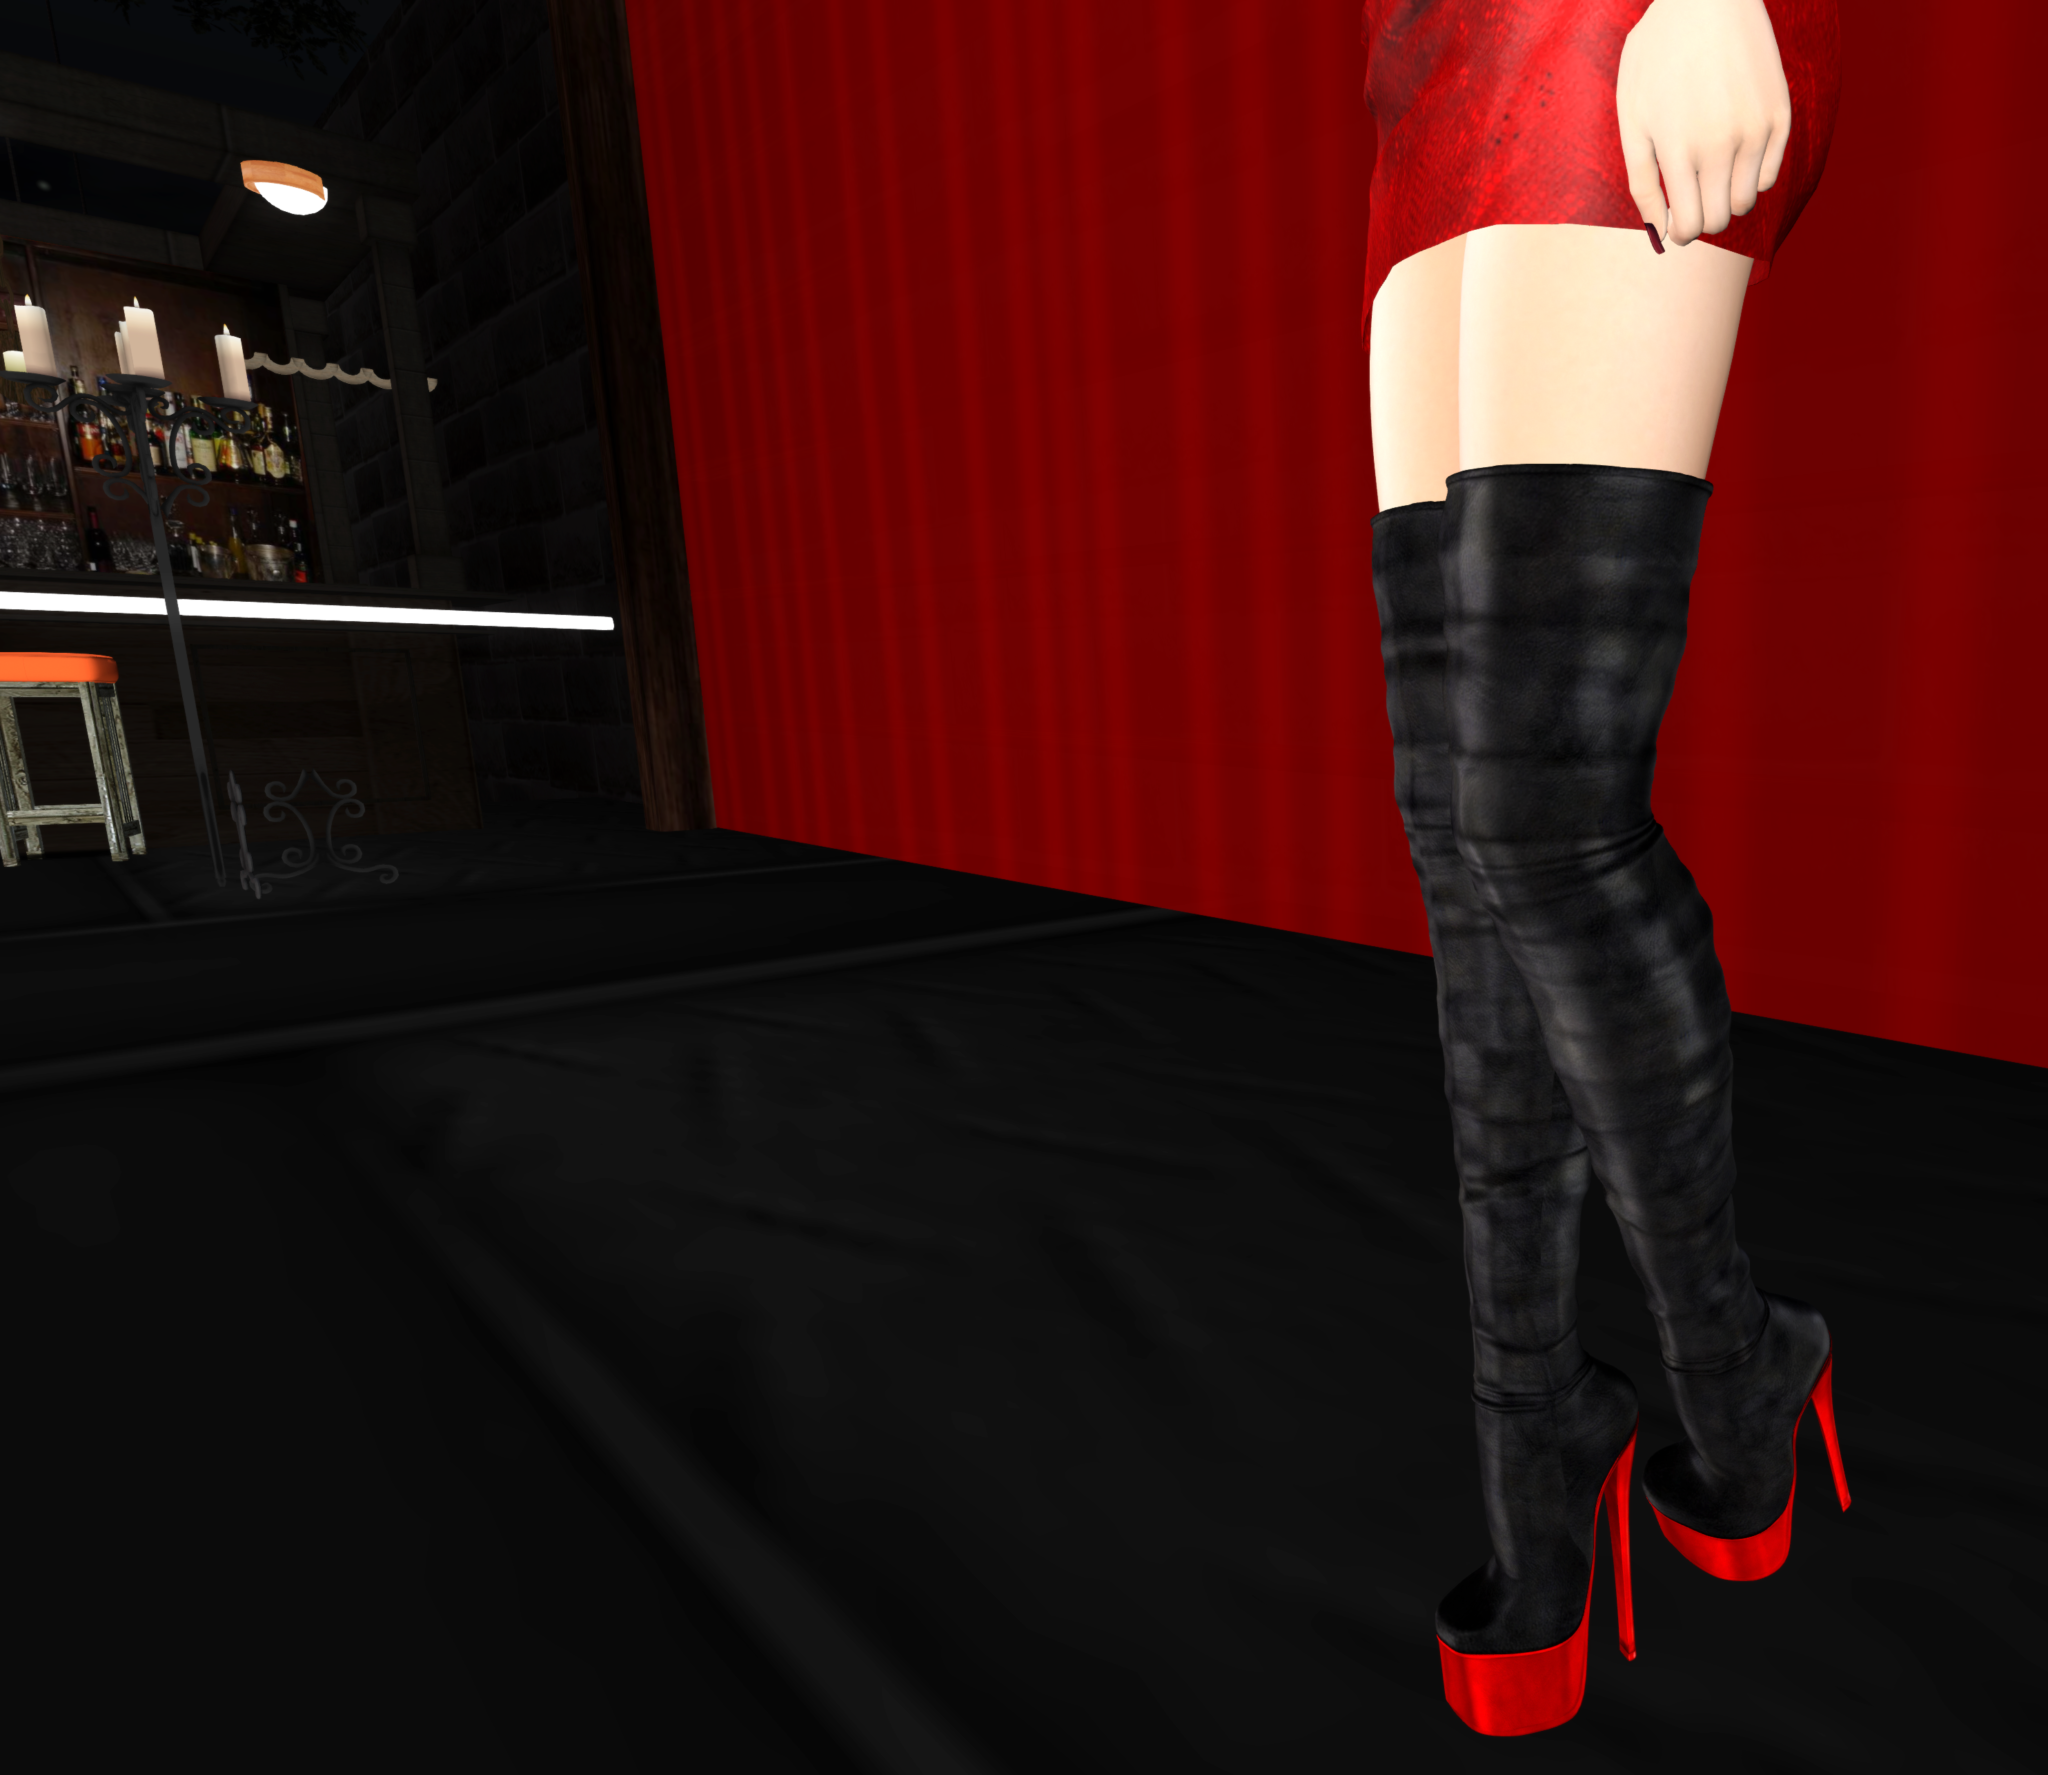 A Second Life avatar with MODA Boots stands in a nightclub